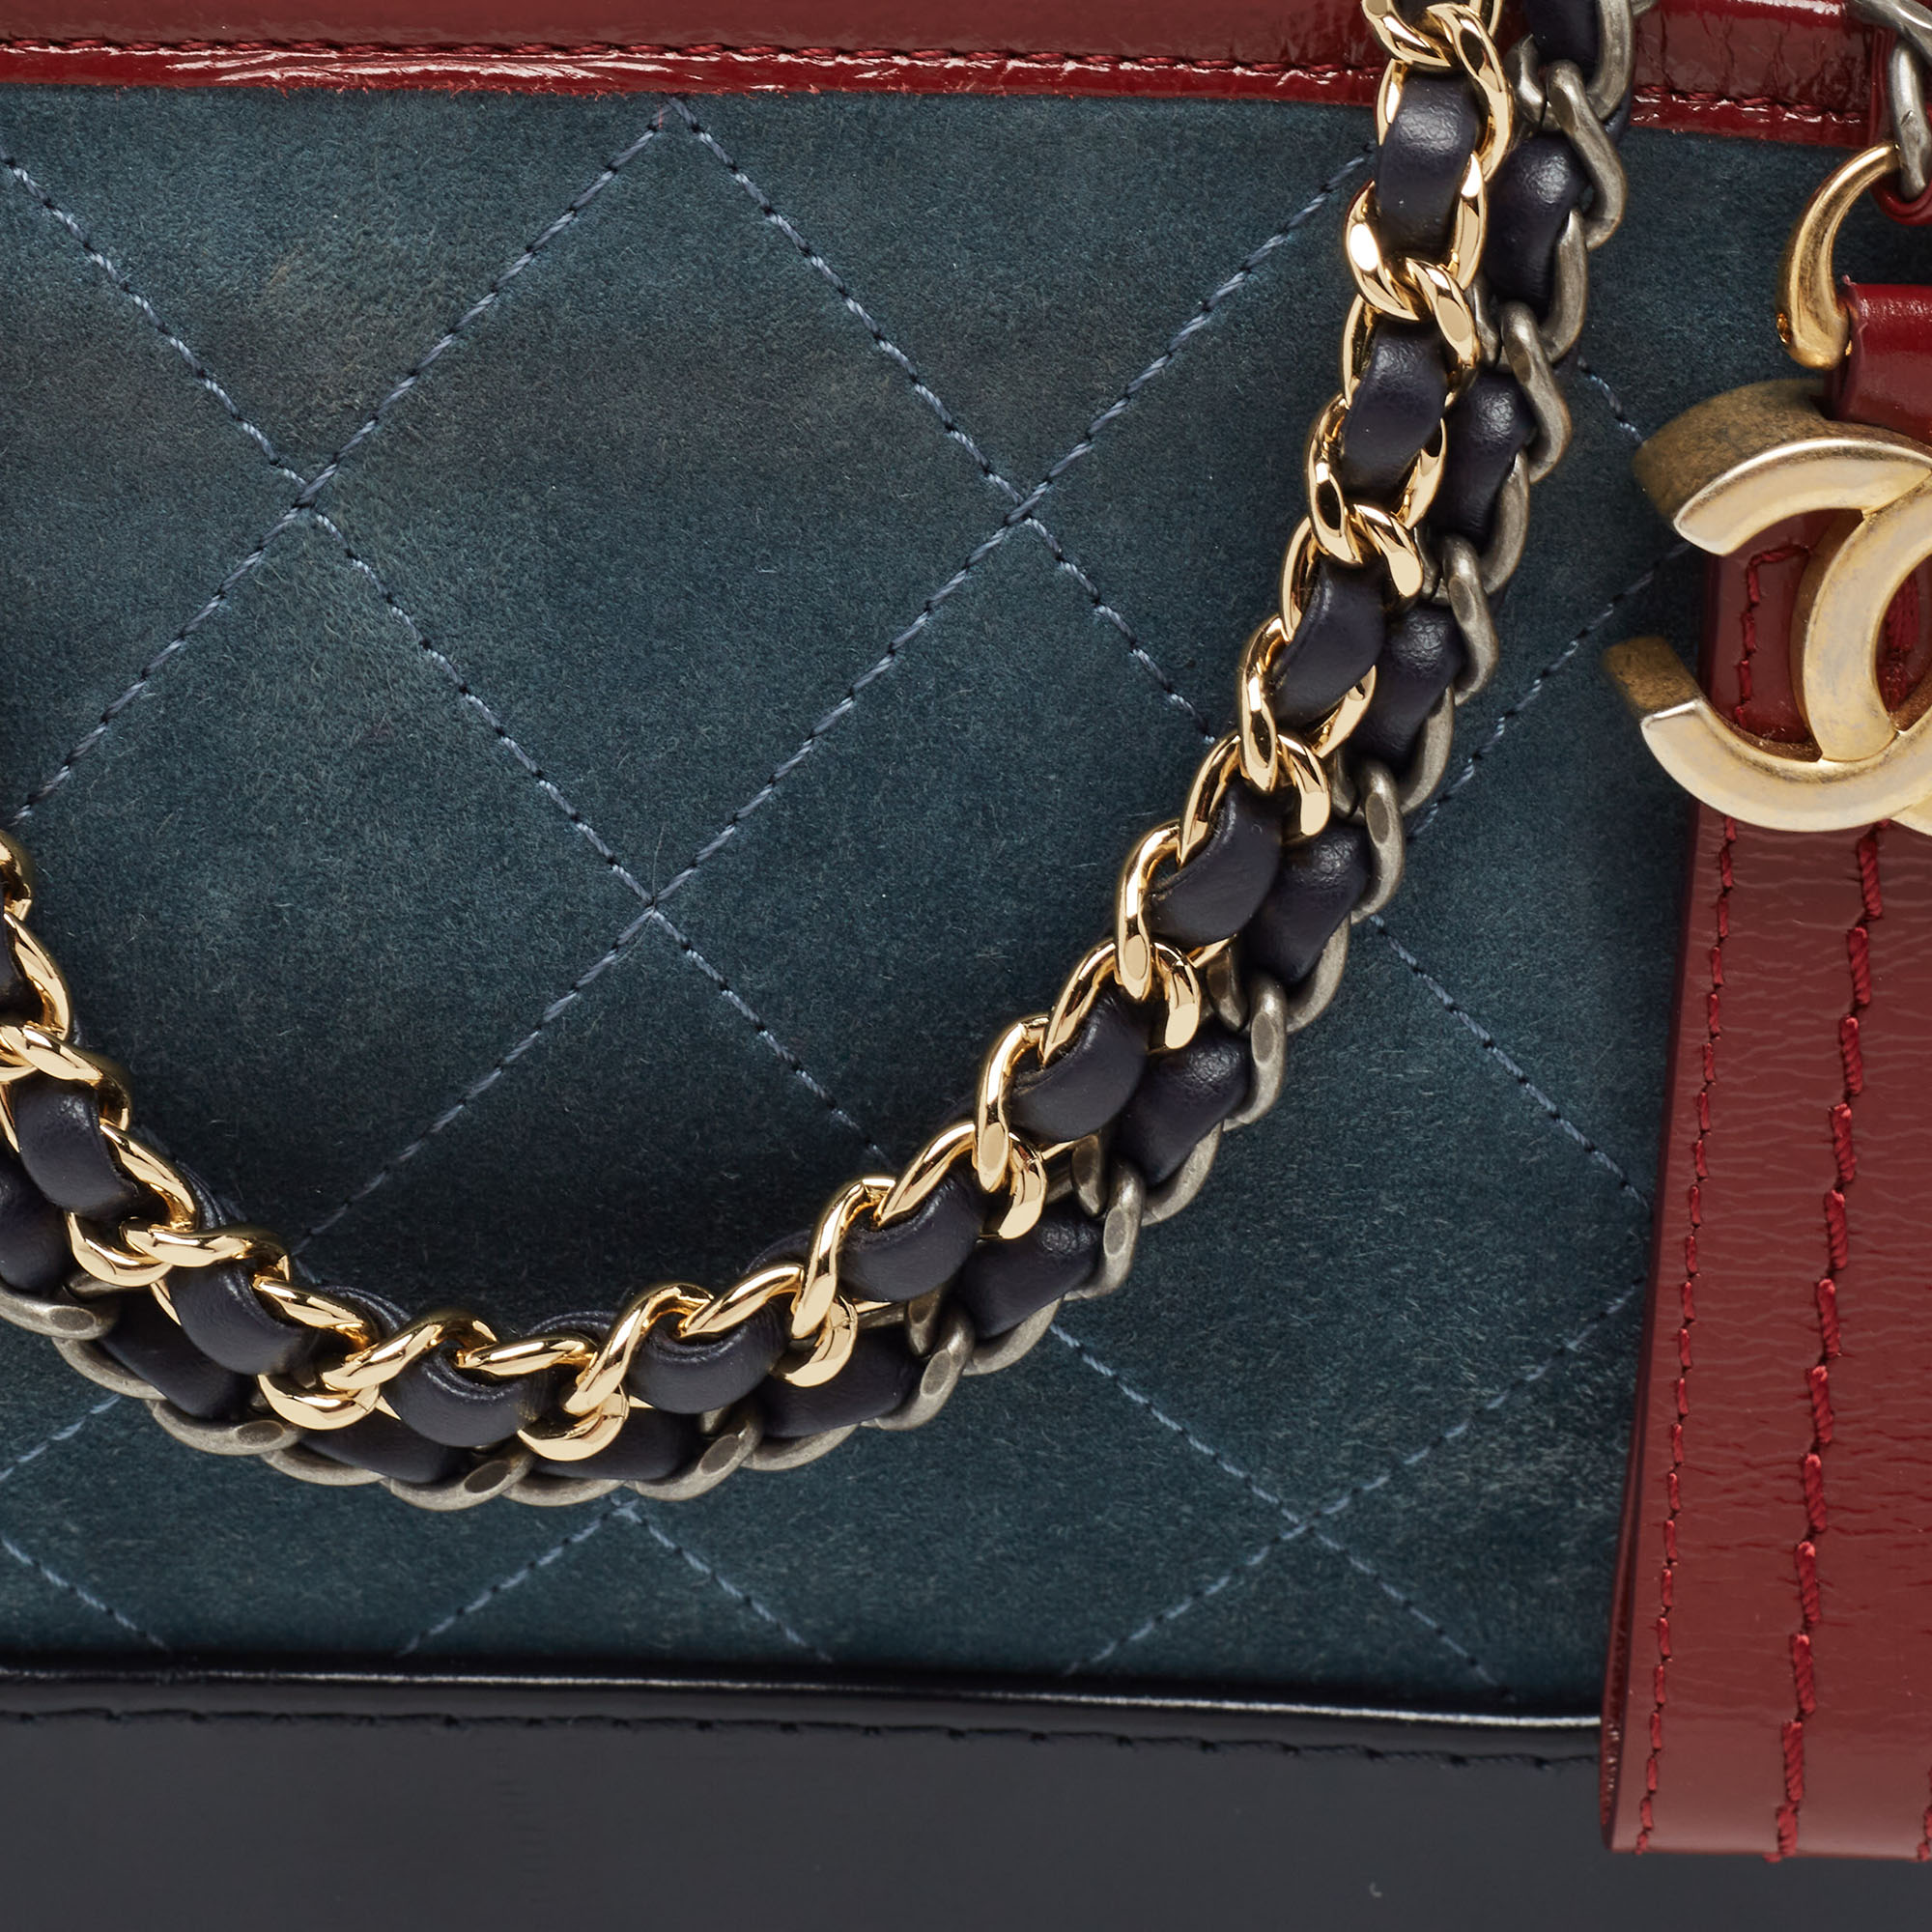 Chanel Multicolor Quilted Suede And Leather Small Gabrielle Bag